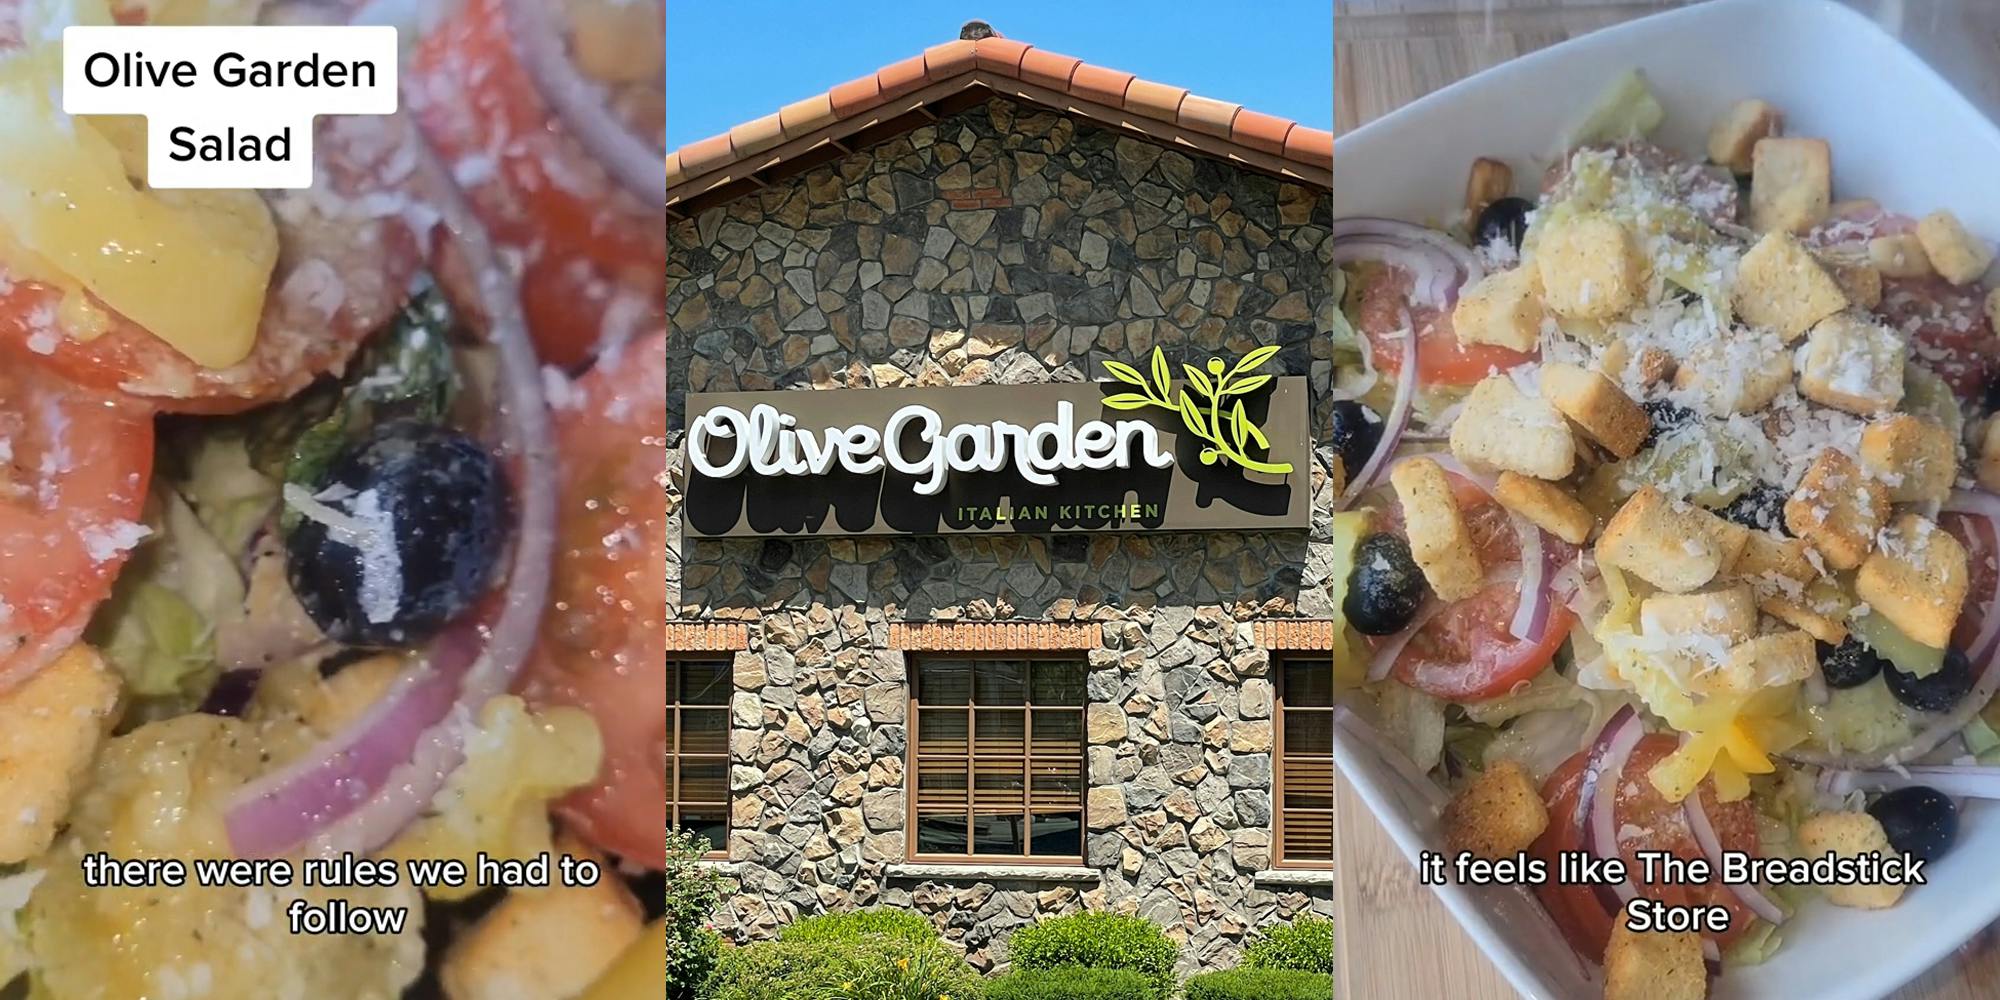 salad with caption "Olive Garden Salad there were rules we had to follow" (l) Olive Garden building with sign (c) salad with caption "it feels like The Breadstick Store" (r)